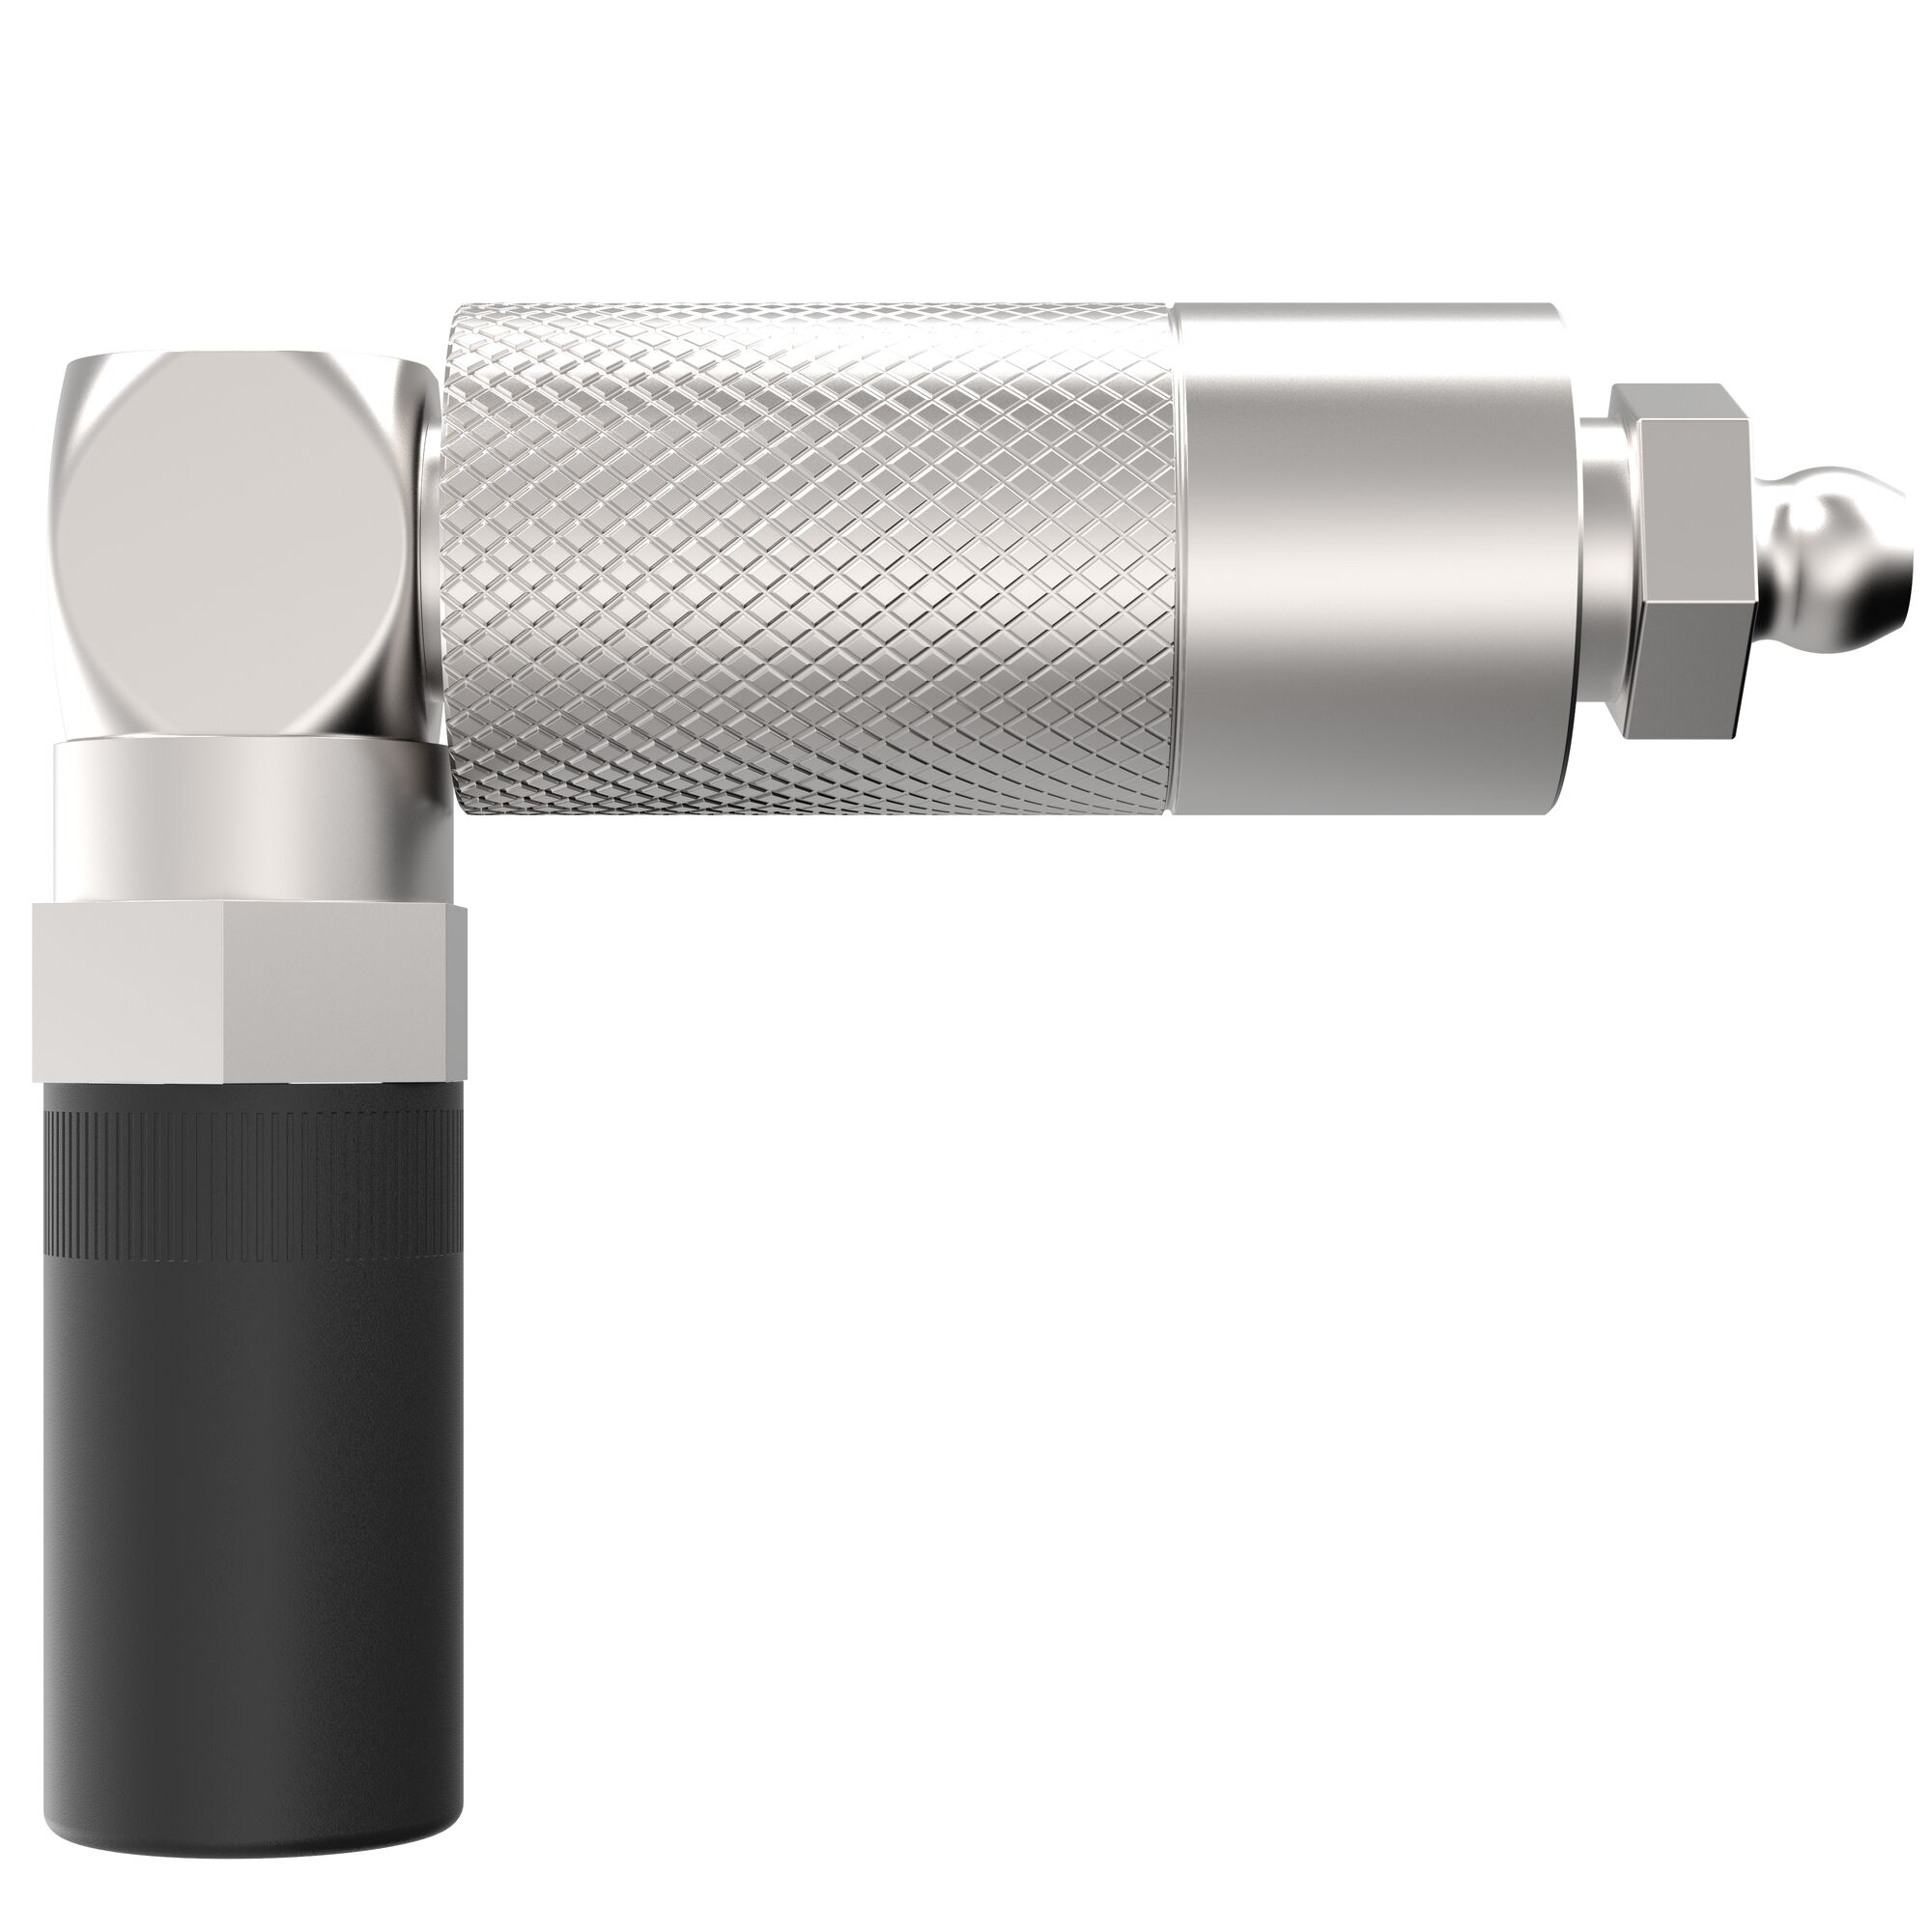 Grease Gun Accessory on White Background